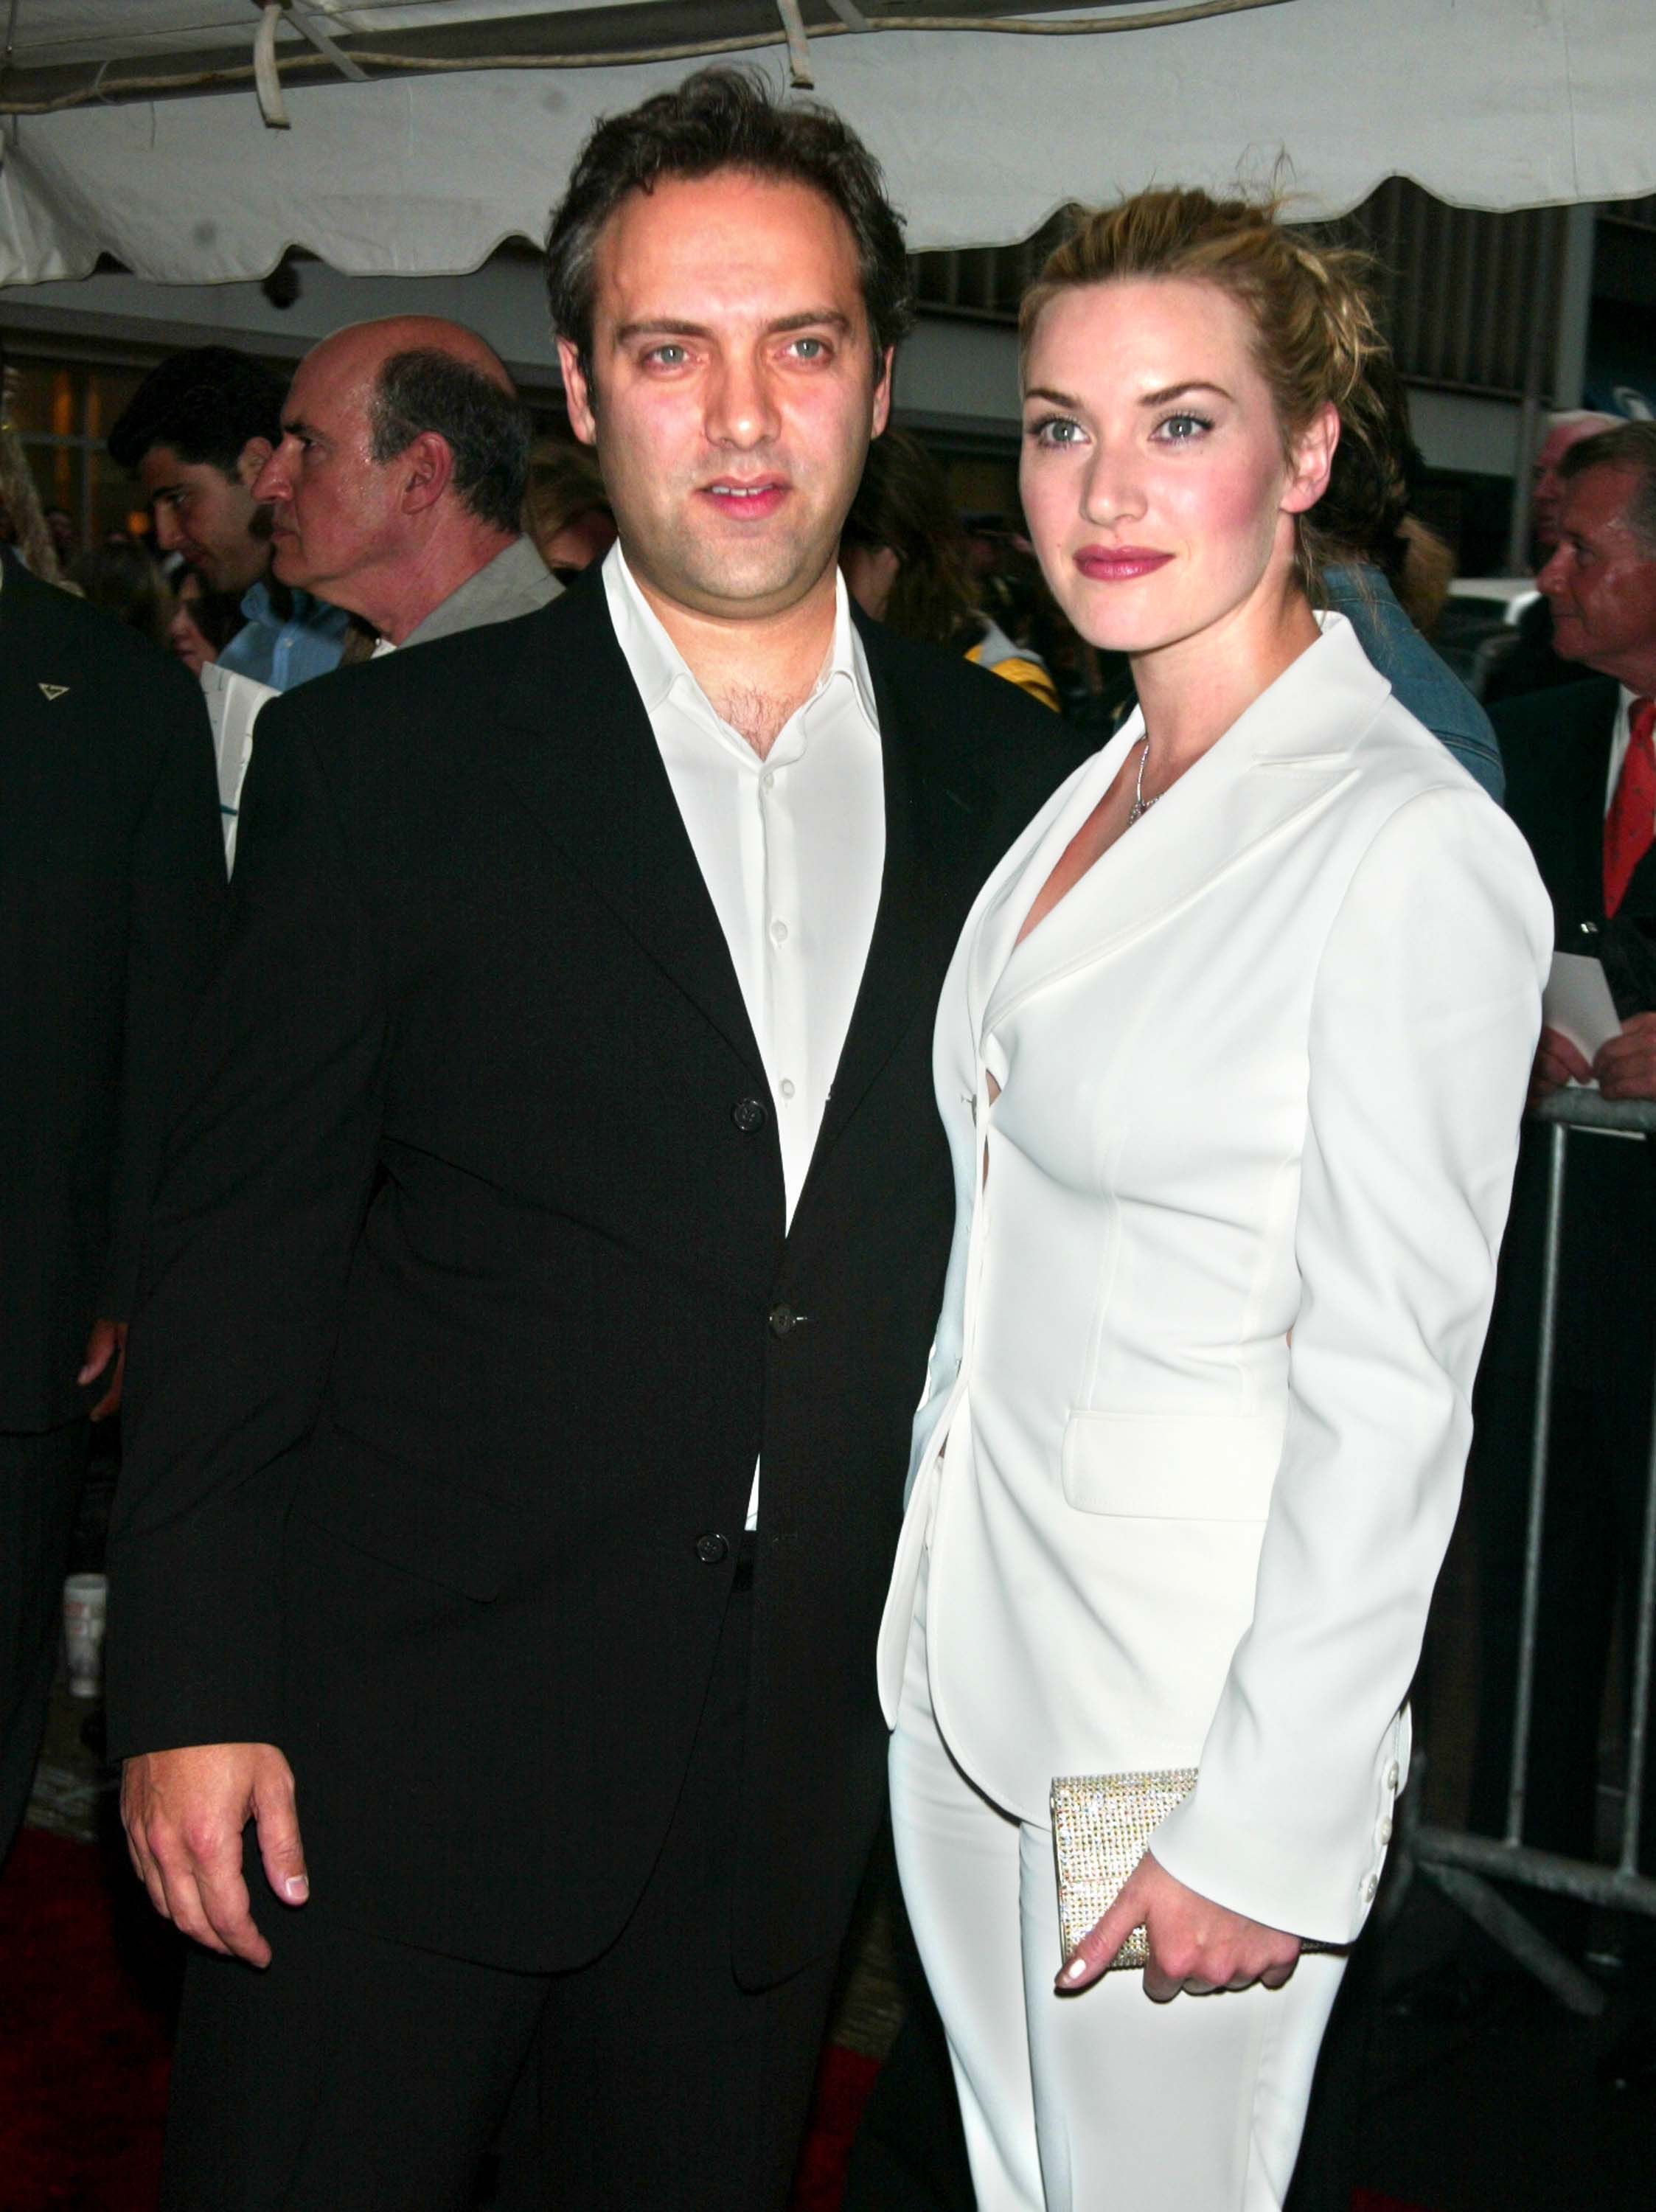 Sam Mendes and Kate Winslet at the "Road to Perdition" premiere in New York City | Source: Getty Images